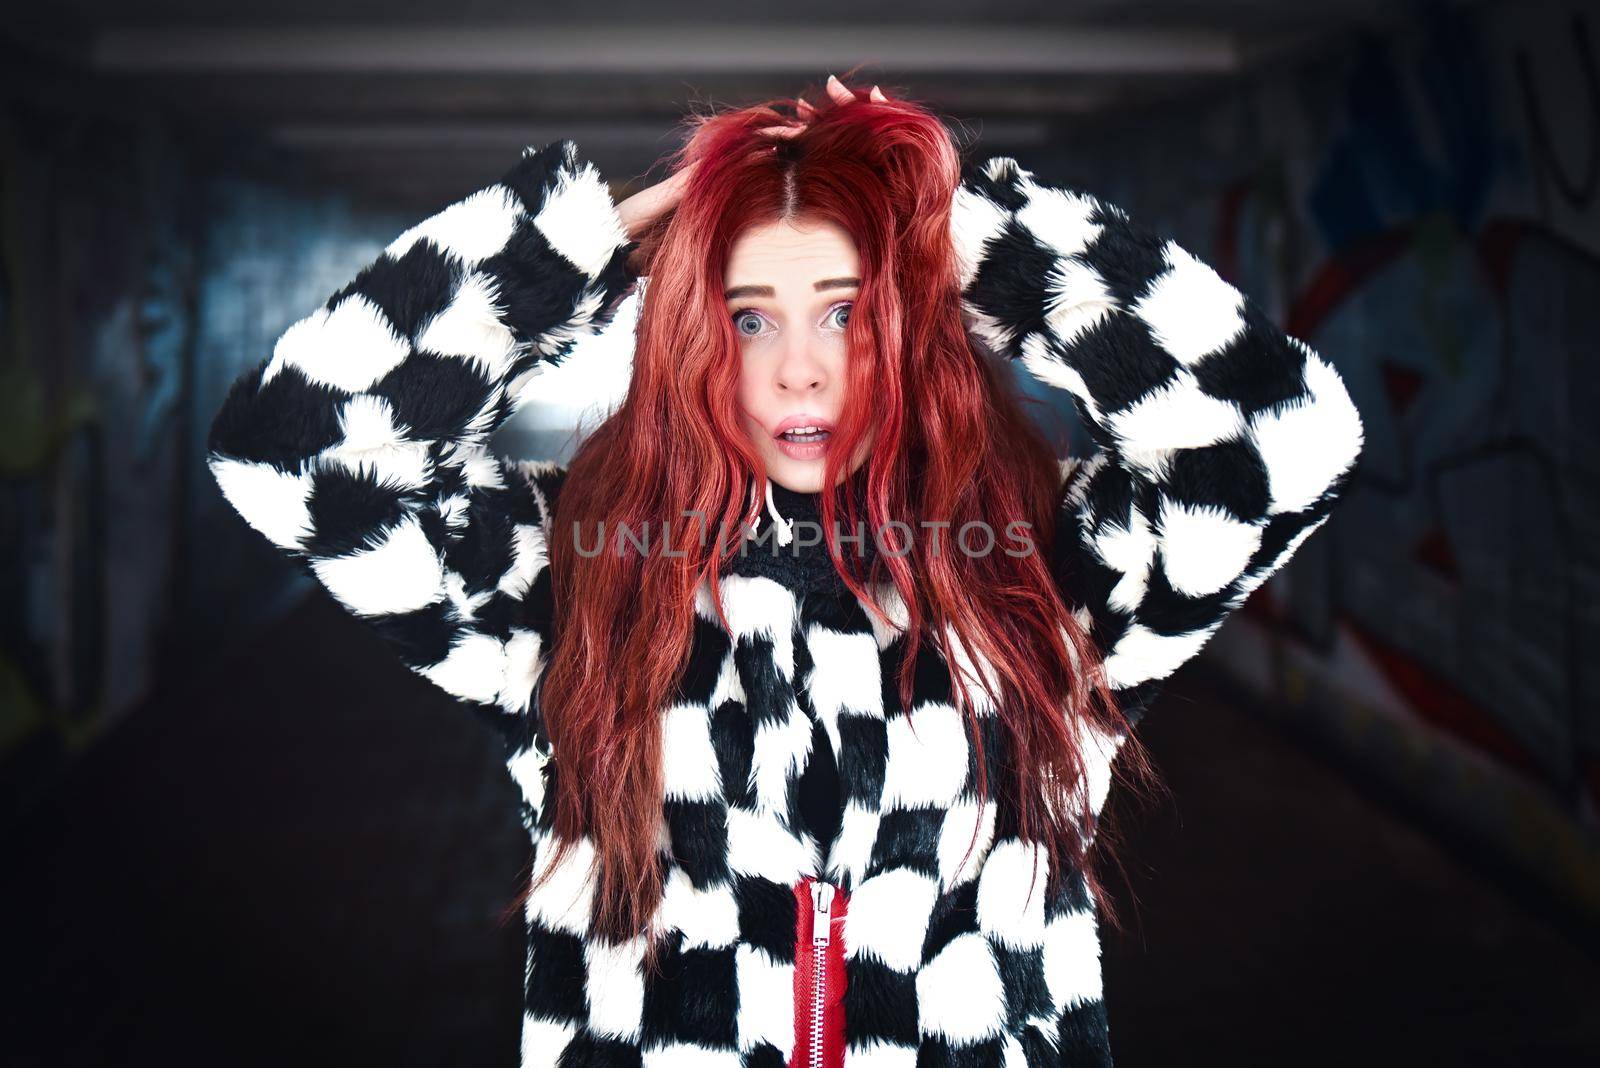 Concepts Against Violence. A very scared Girl with red hair stands near the exit of a dark subway. Expression emotions